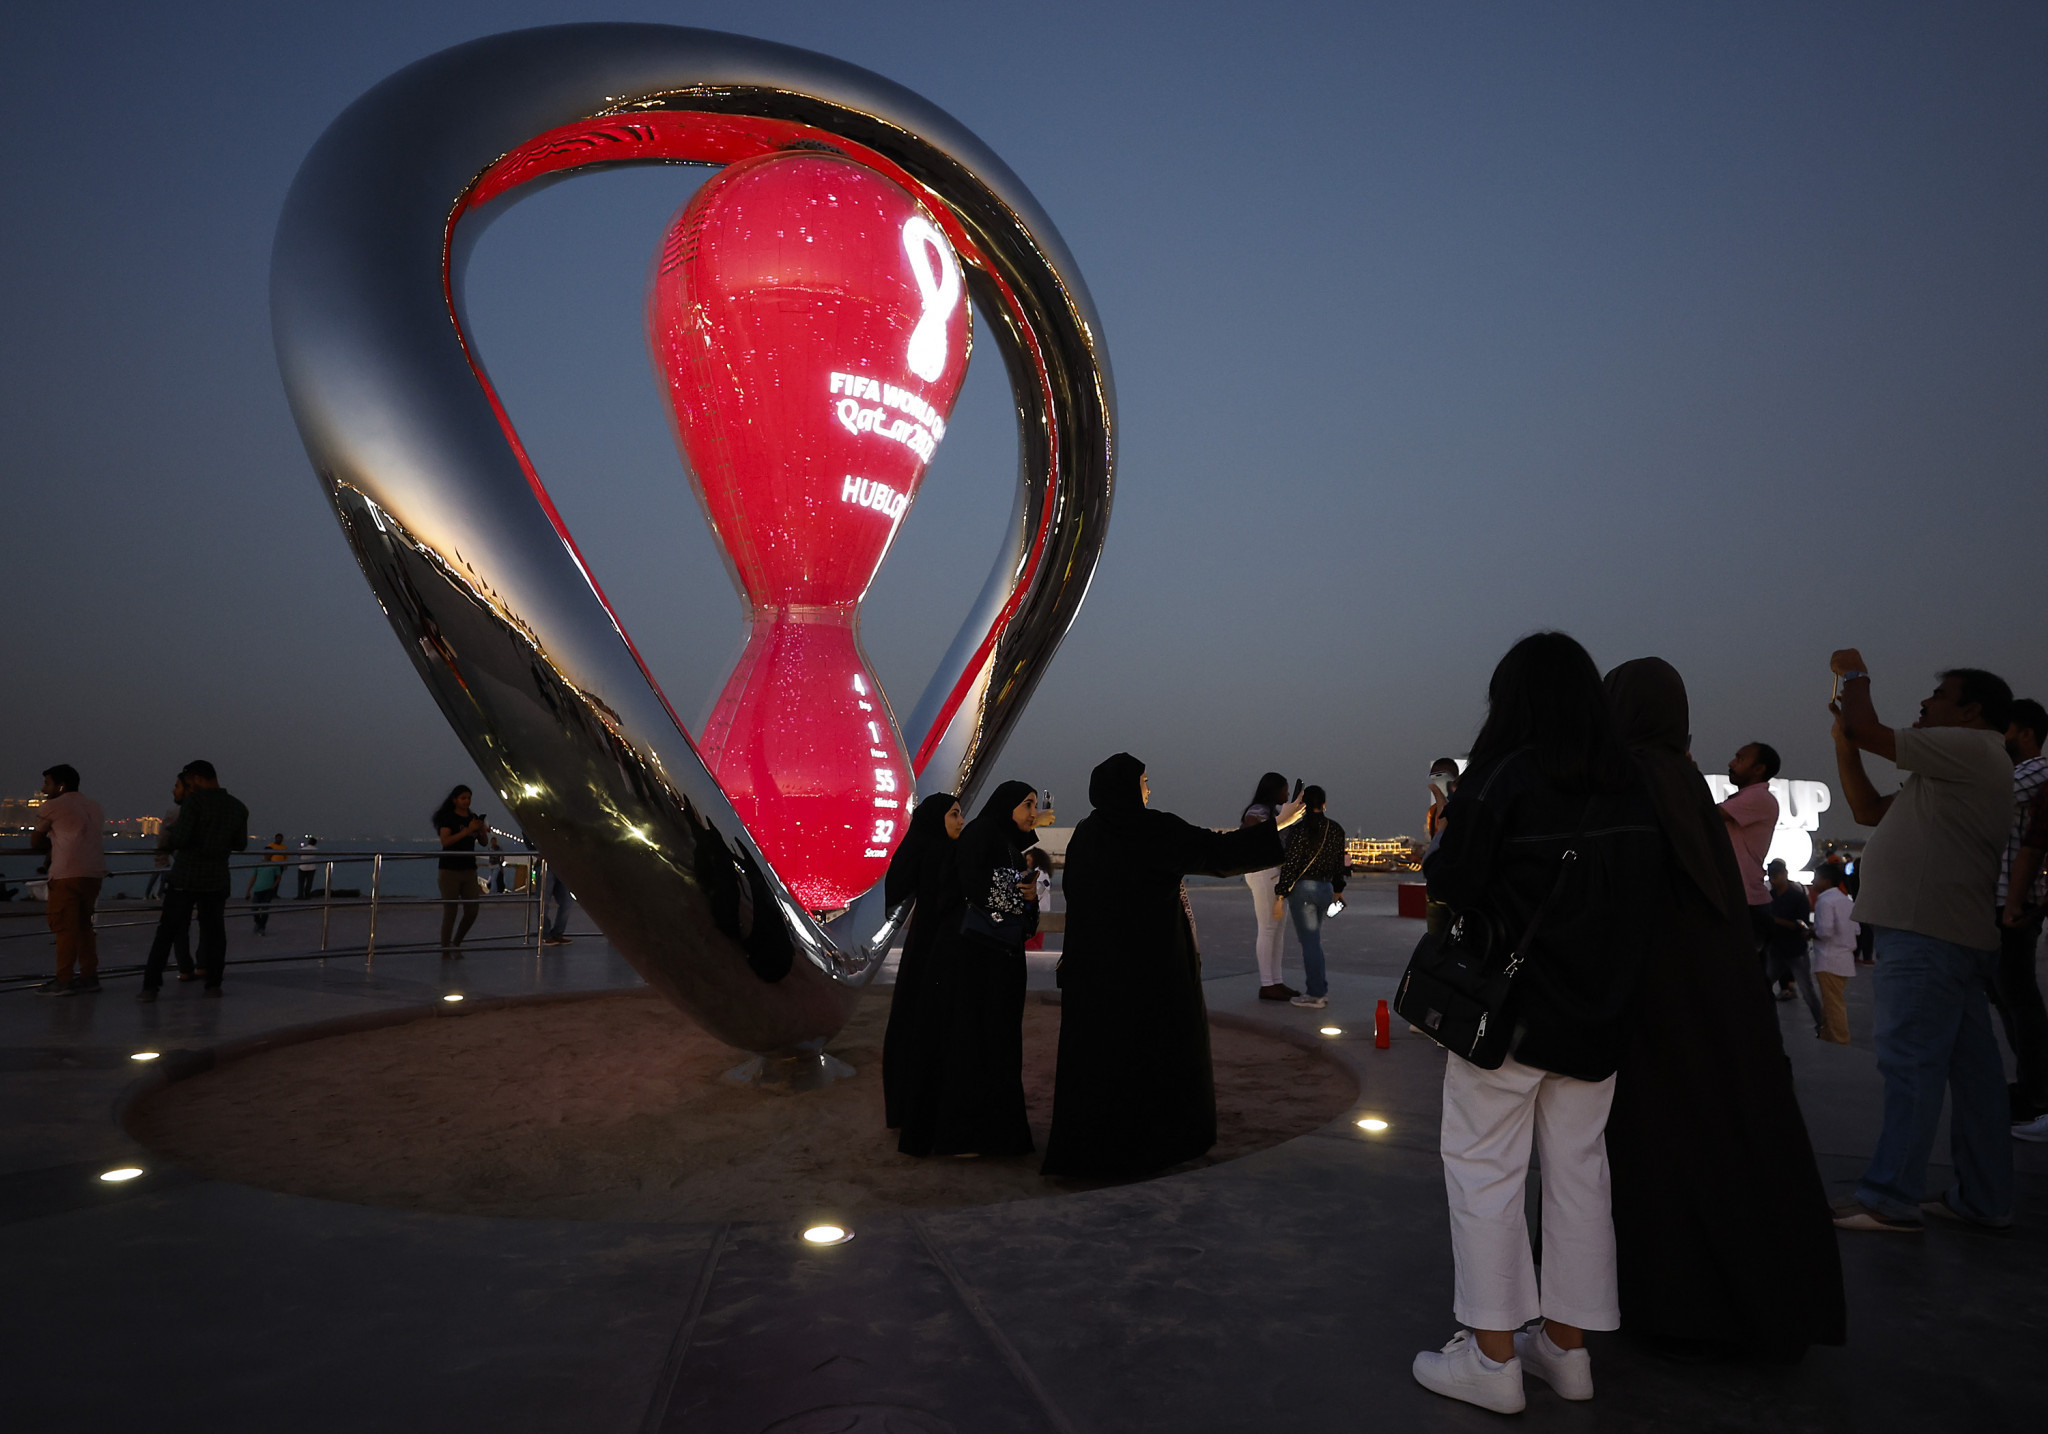 Qatar is currently hosting the FIFA World Cup ©Getty Images